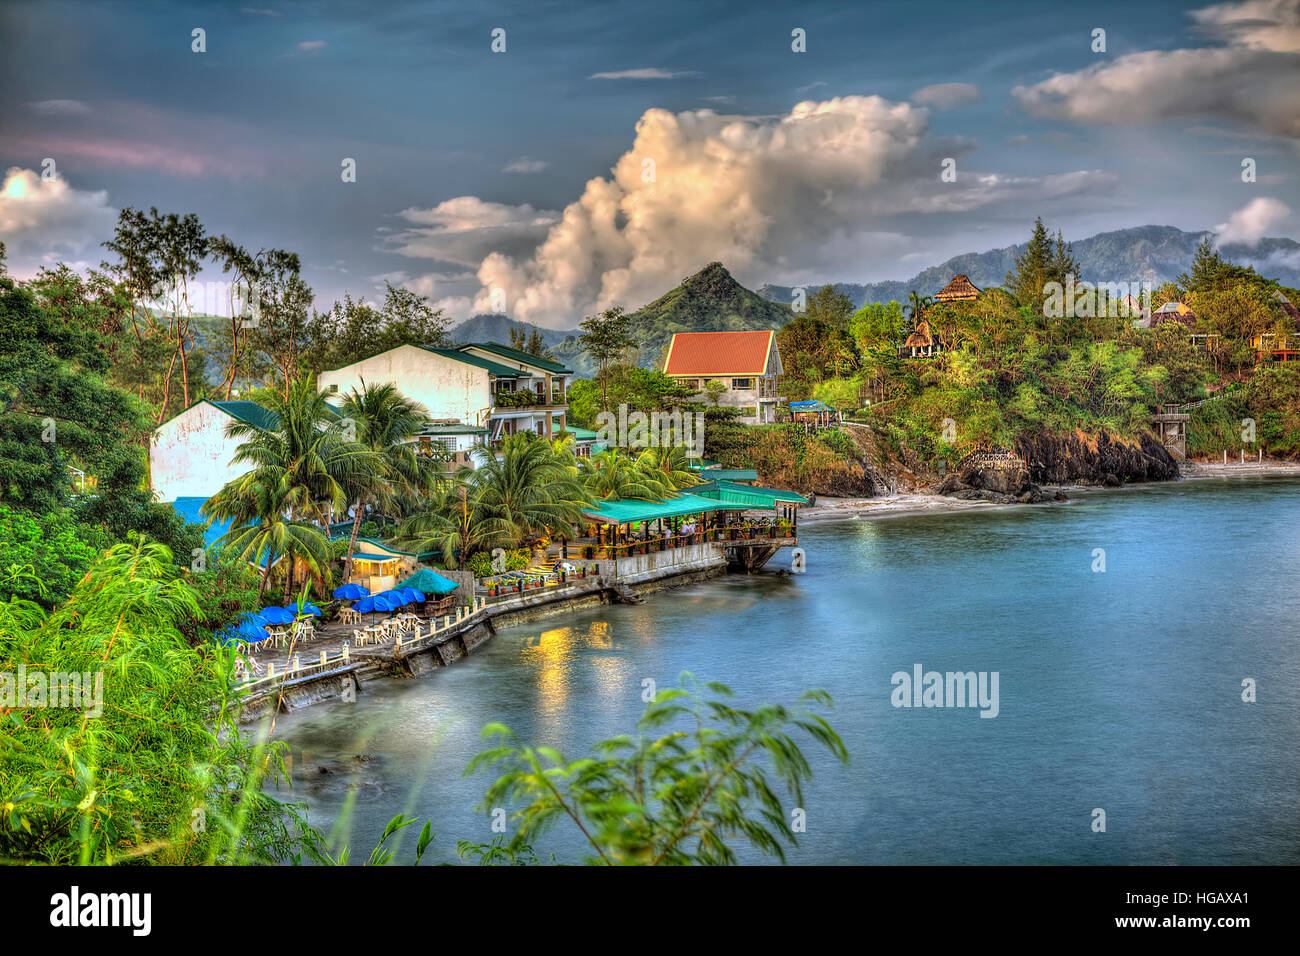 Sheaven's Resort and surrounding mountains at Baloy Long Beach, Subic Bay, Luzon Island, Philippines. Stock Photo